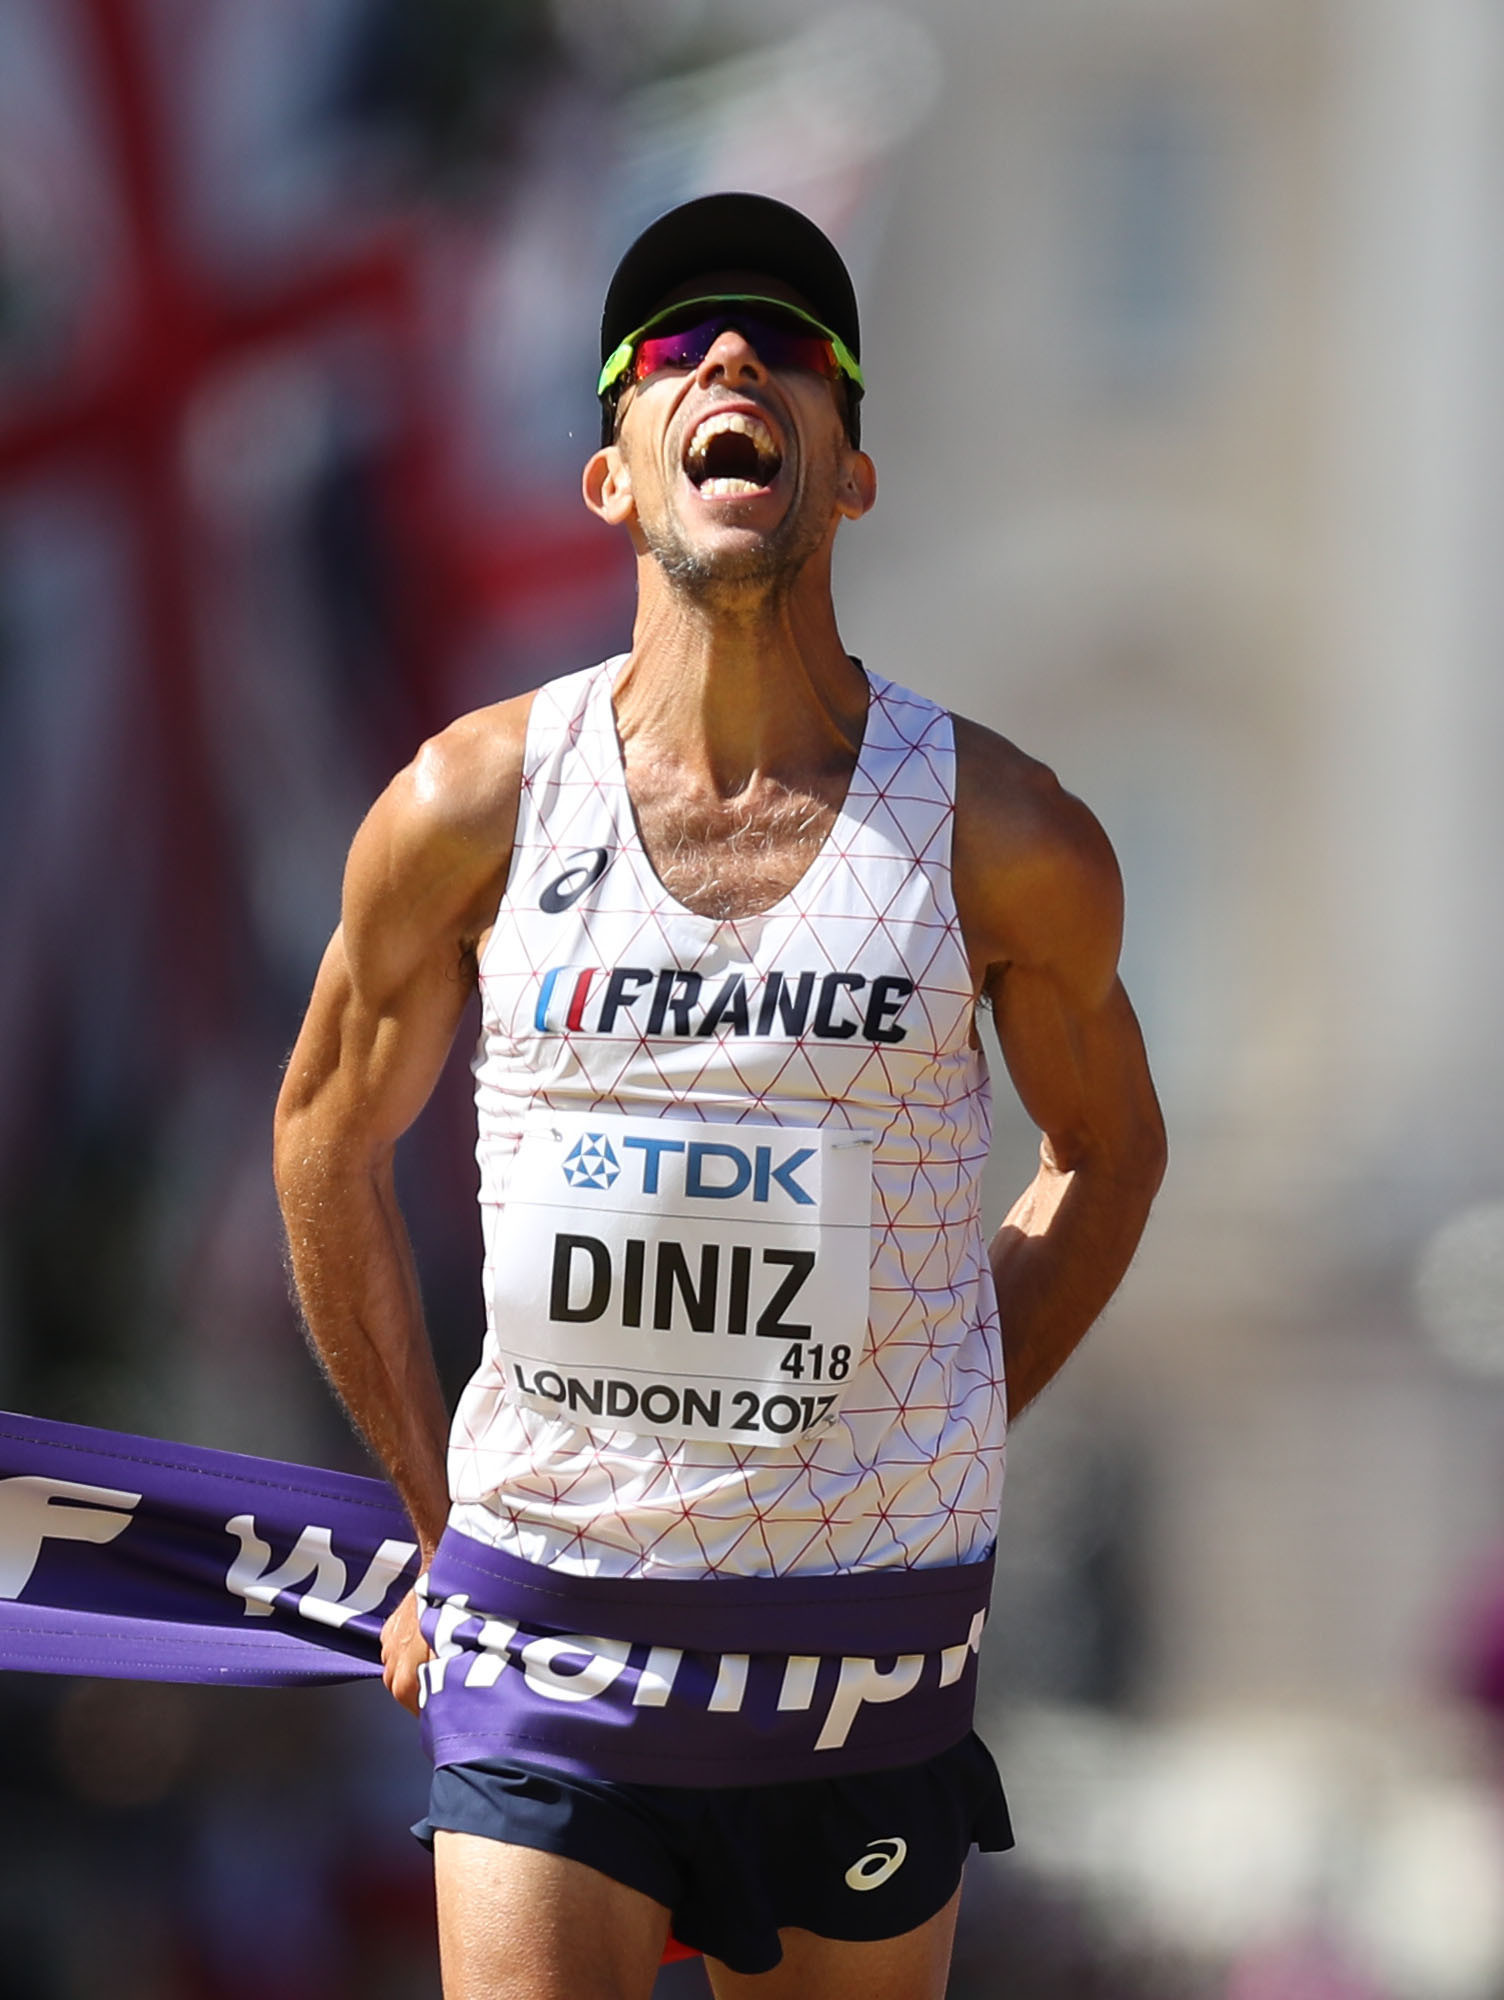 France's world record holder and champion Yohann Diniz won the 50km event at the European Race Walking Cup in Lithuania in his third fastest time ©Getty Images